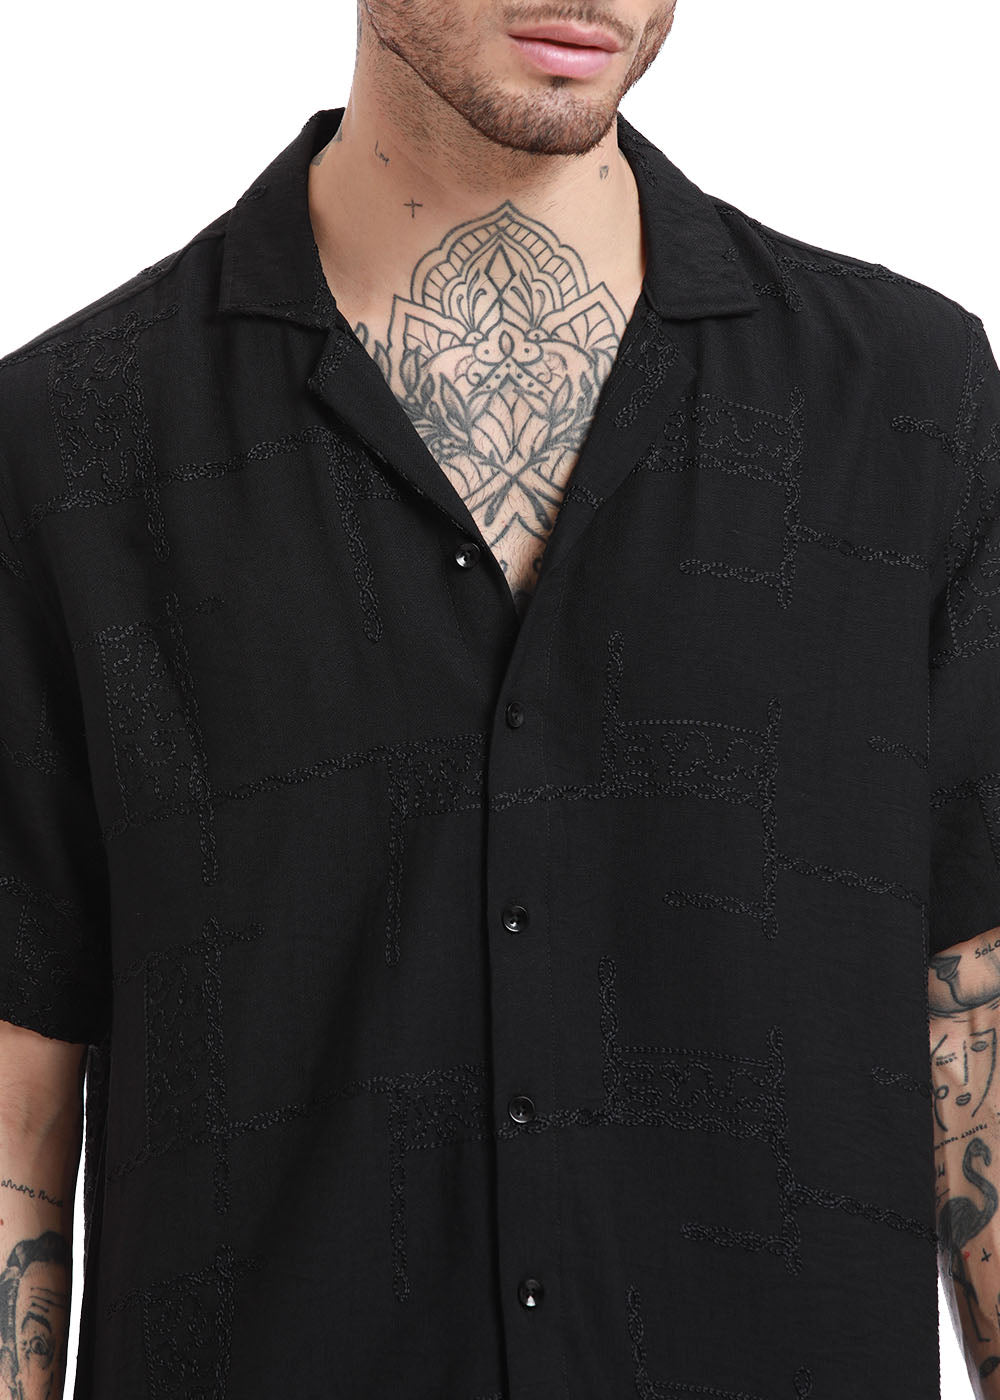 Carbon Black Embroidered Shirt